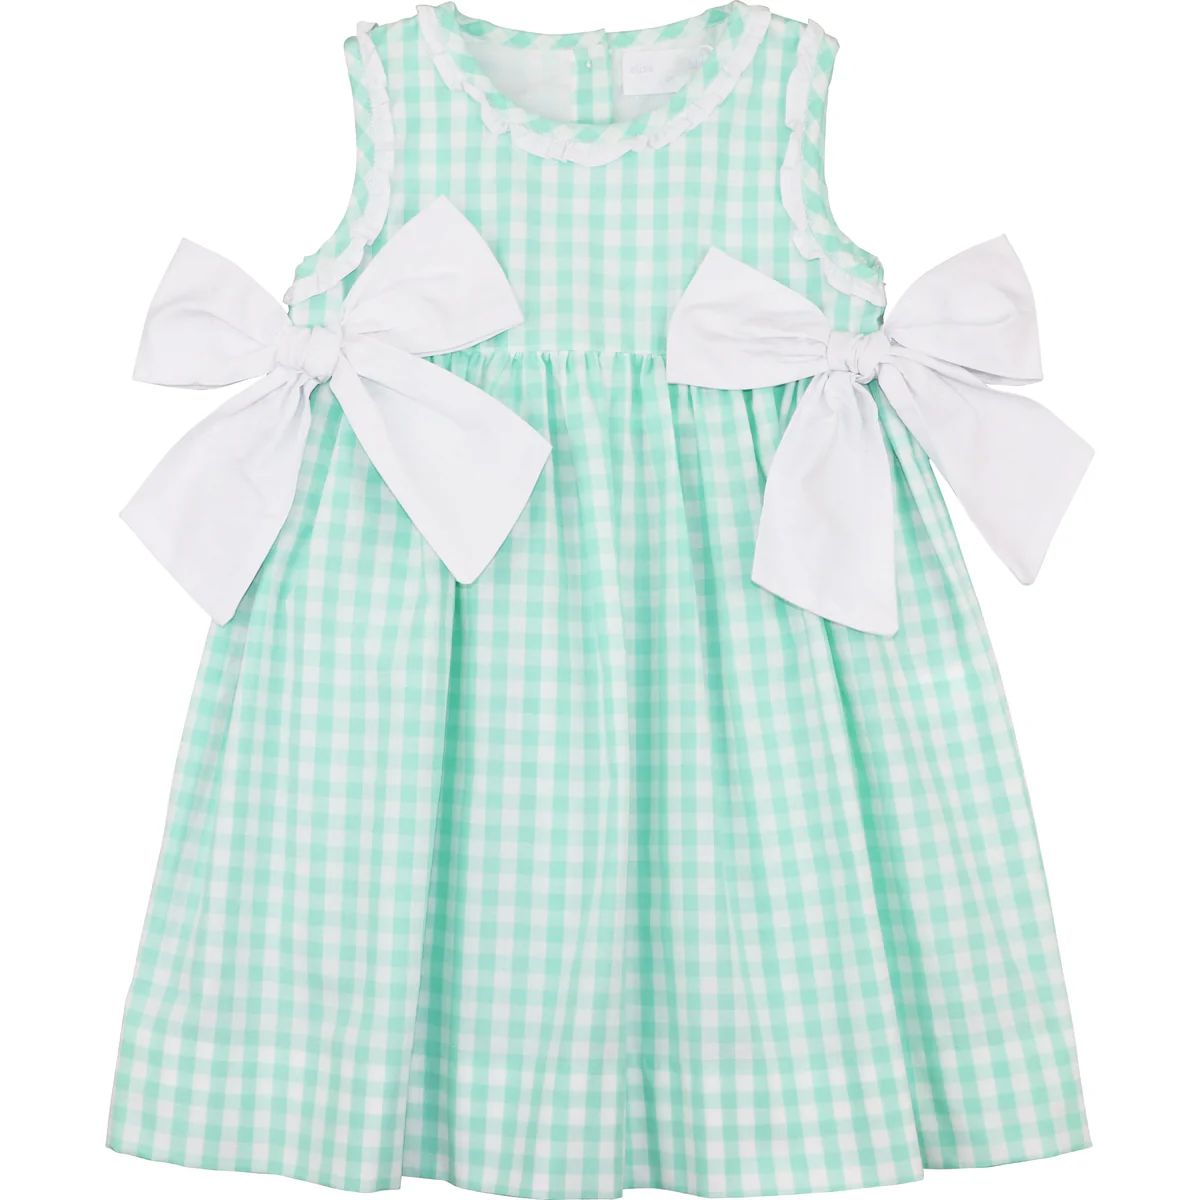 Mint Check Bow Dress - Shipping Late March | Eliza James Kids